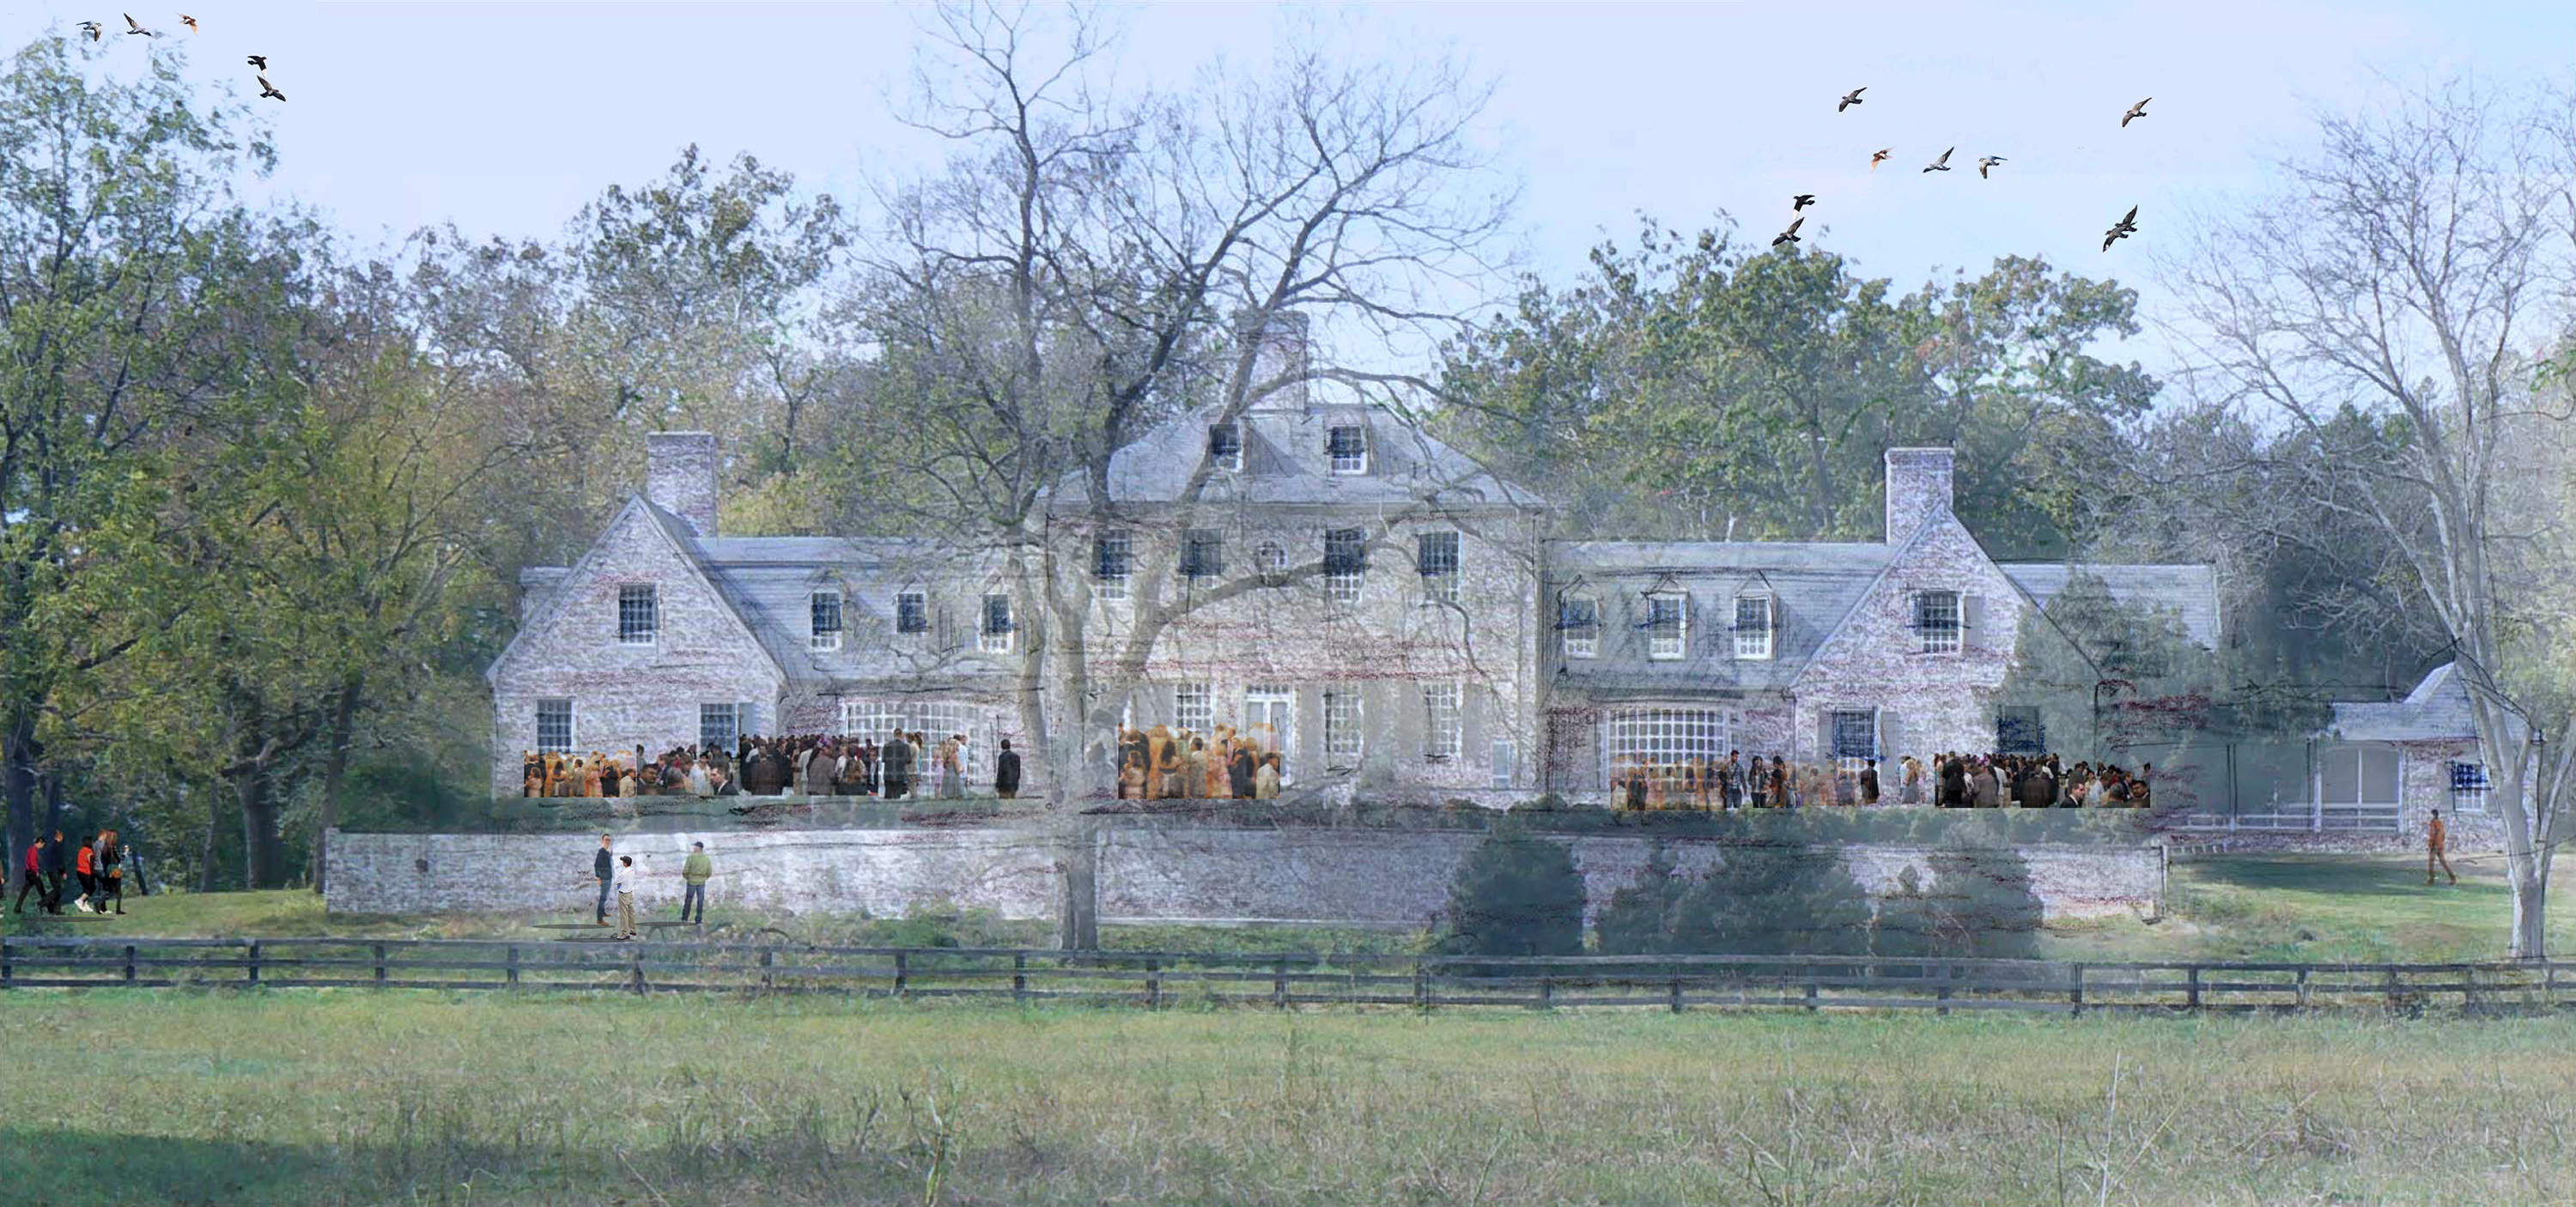 A digital rendering of a large manor home with people standing on the terrace.